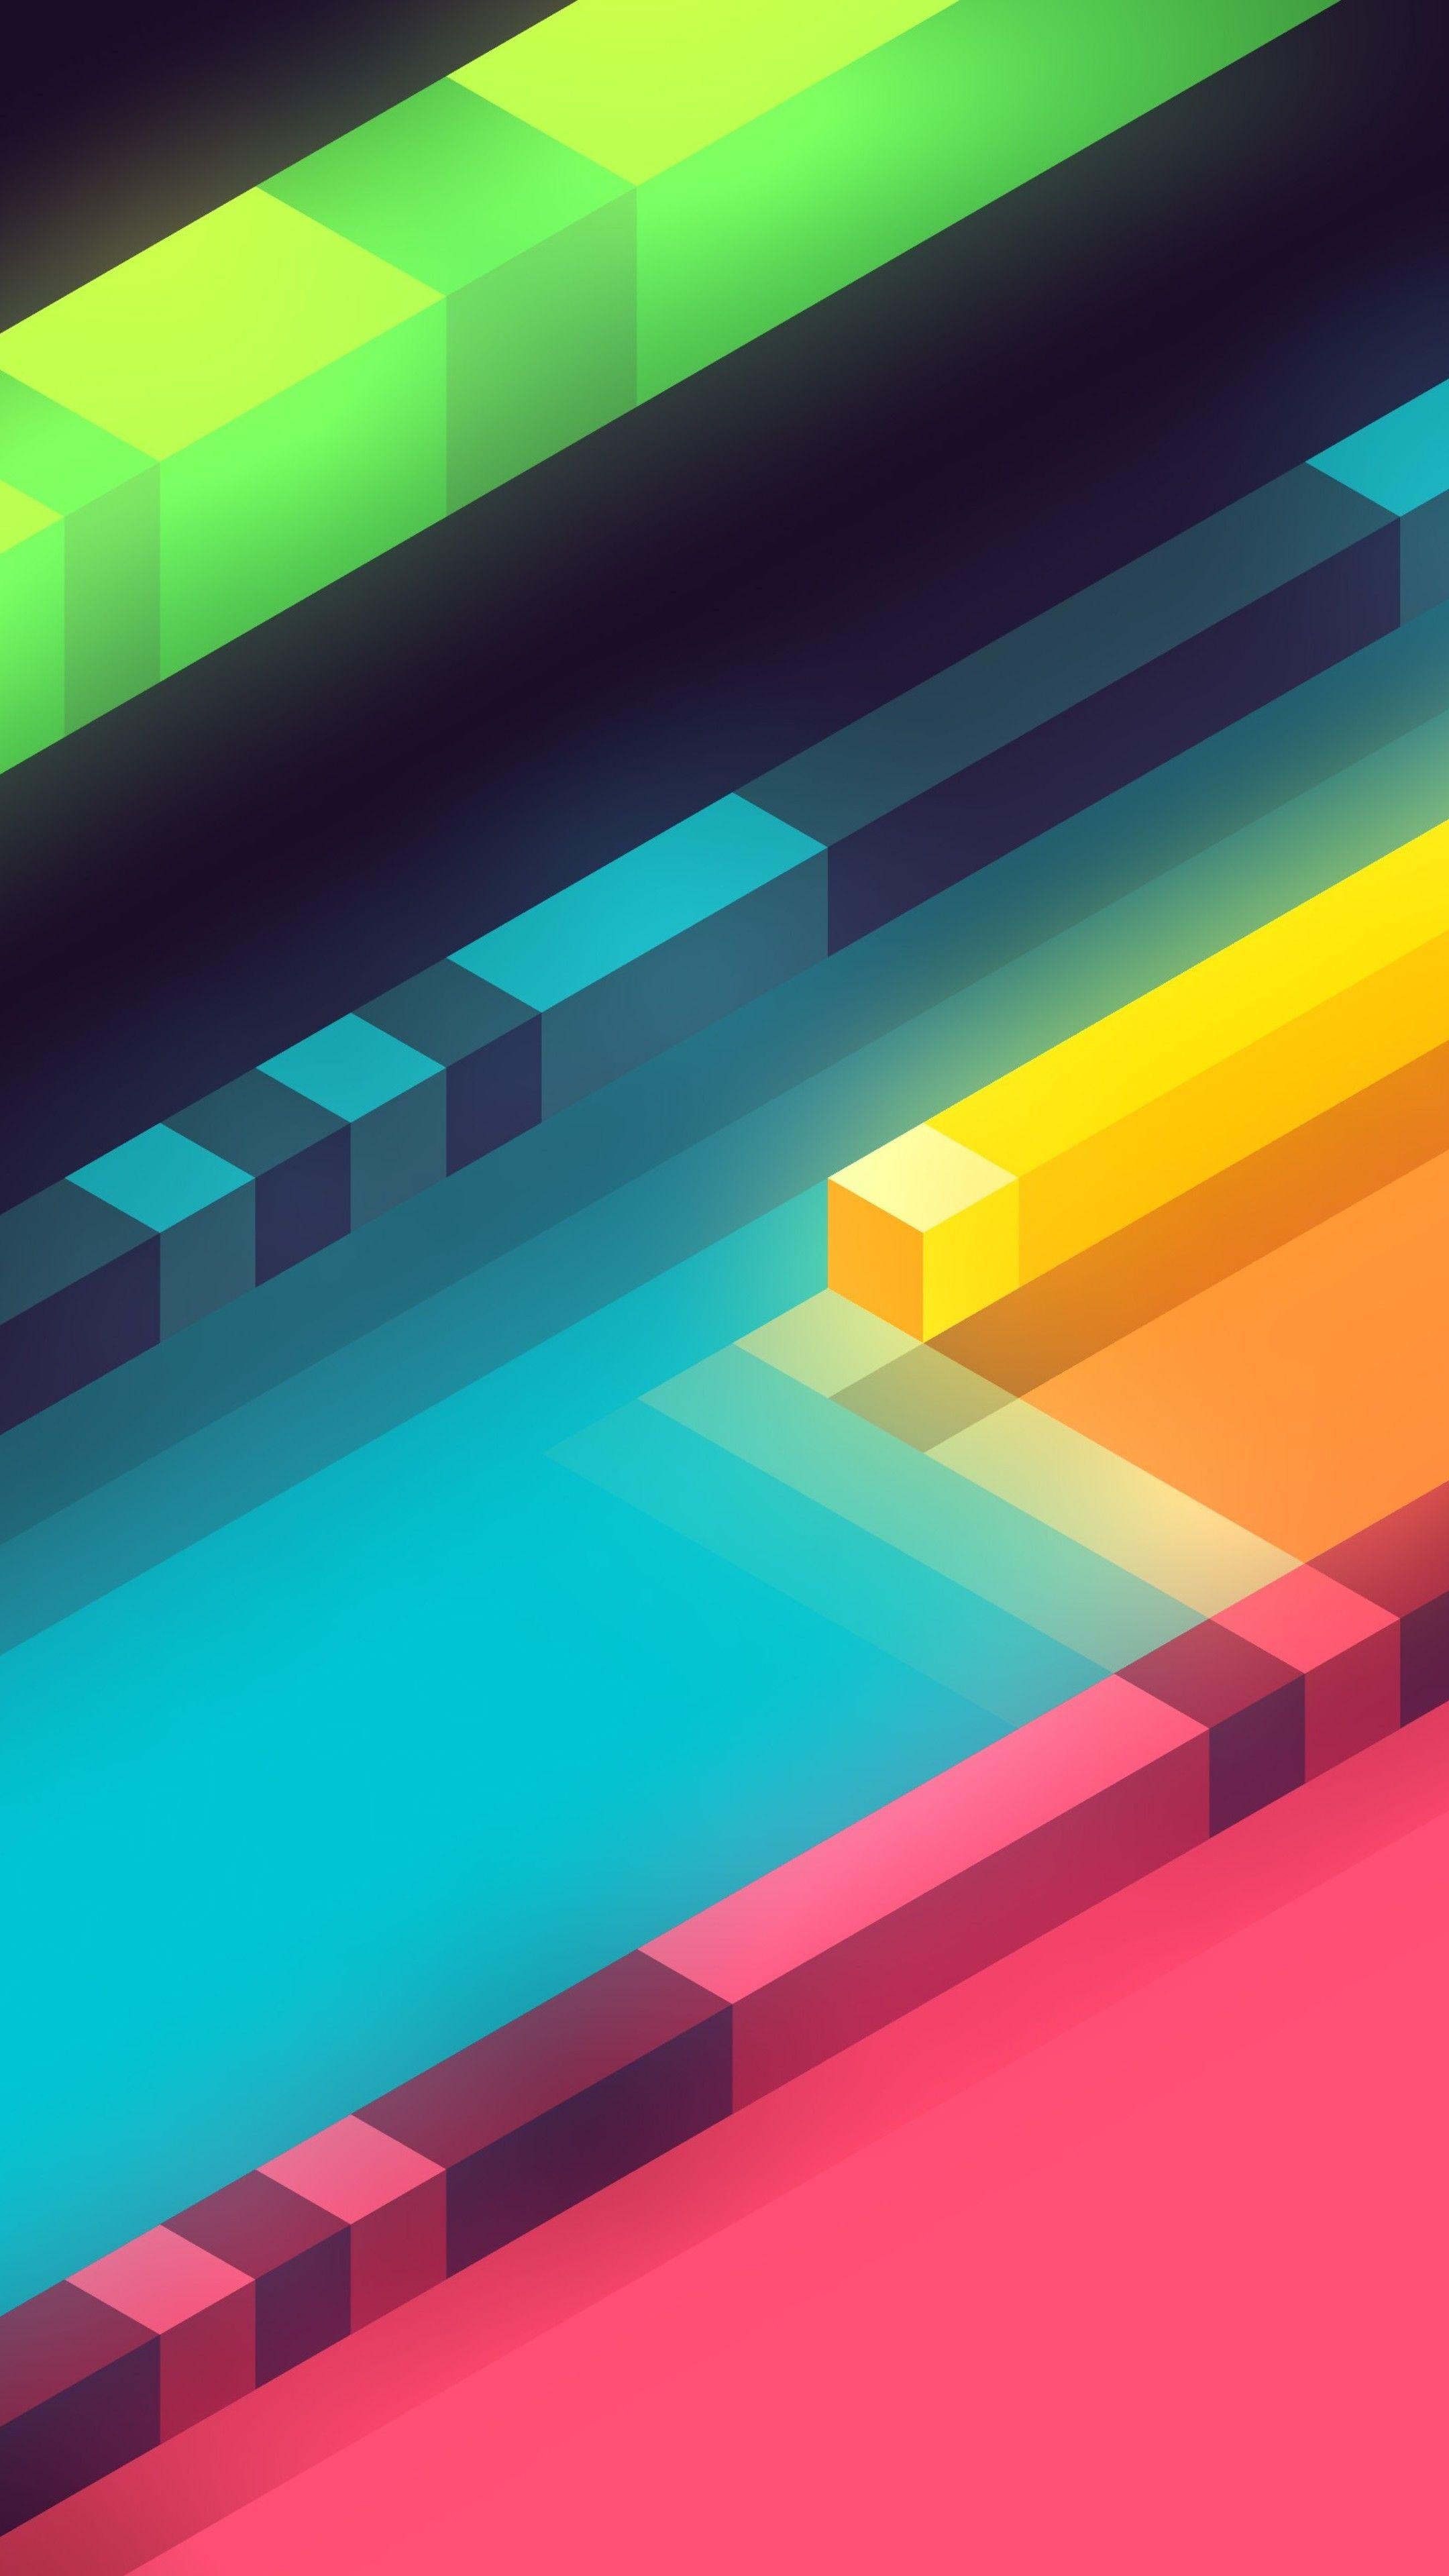 Misc d Abstract Colorful Shapes Minimalist 5k #wallpaper. Best iphone wallpaper, Cool wallpaper, Colorful wallpaper